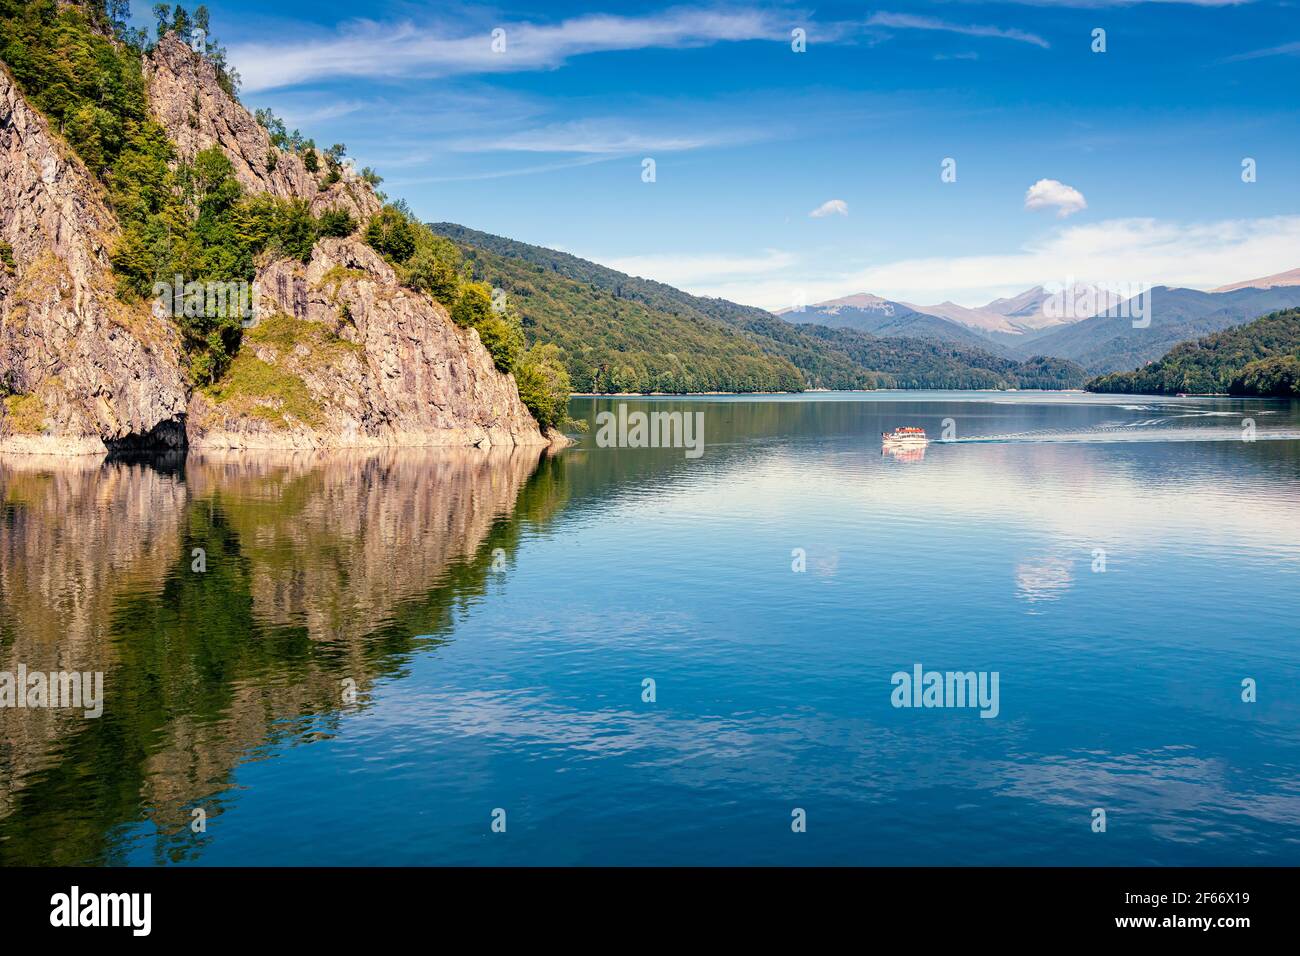 Daylight view to Vidraru lake in Carpathian Mountains. Bright blue sky and green trees. Boat cruising on water. Negative copy space, place for text. T Stock Photo